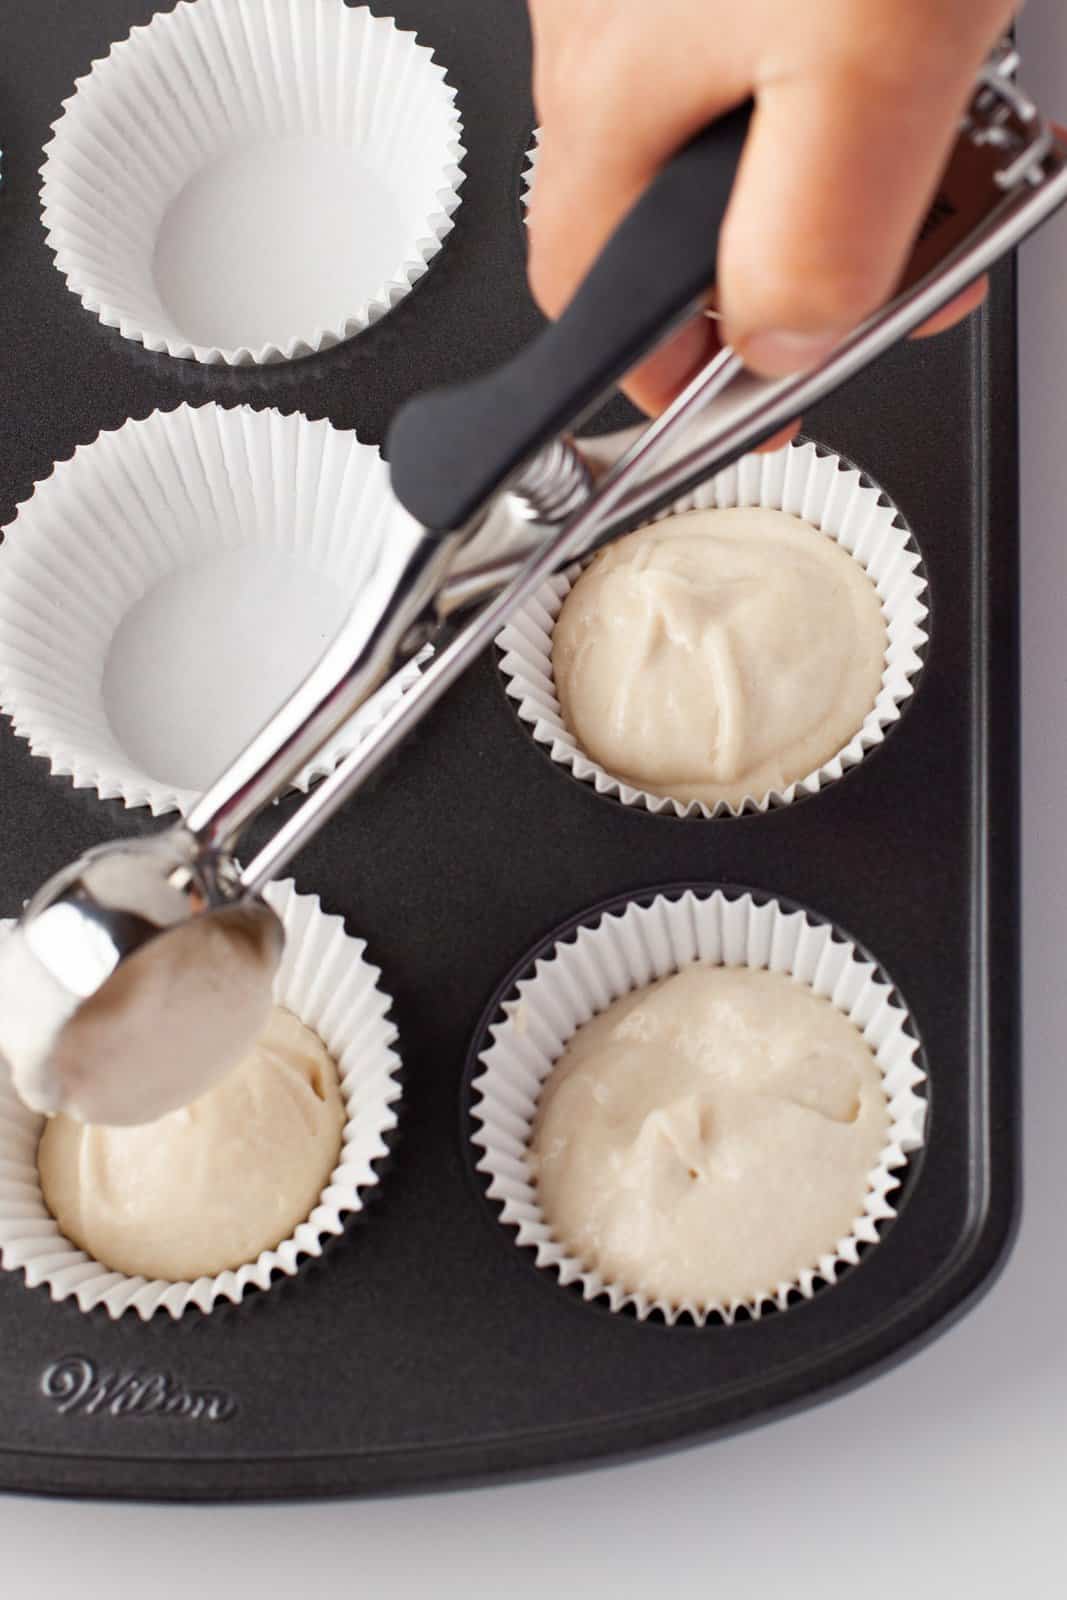 Cupcake batter being placed in liners in pan.